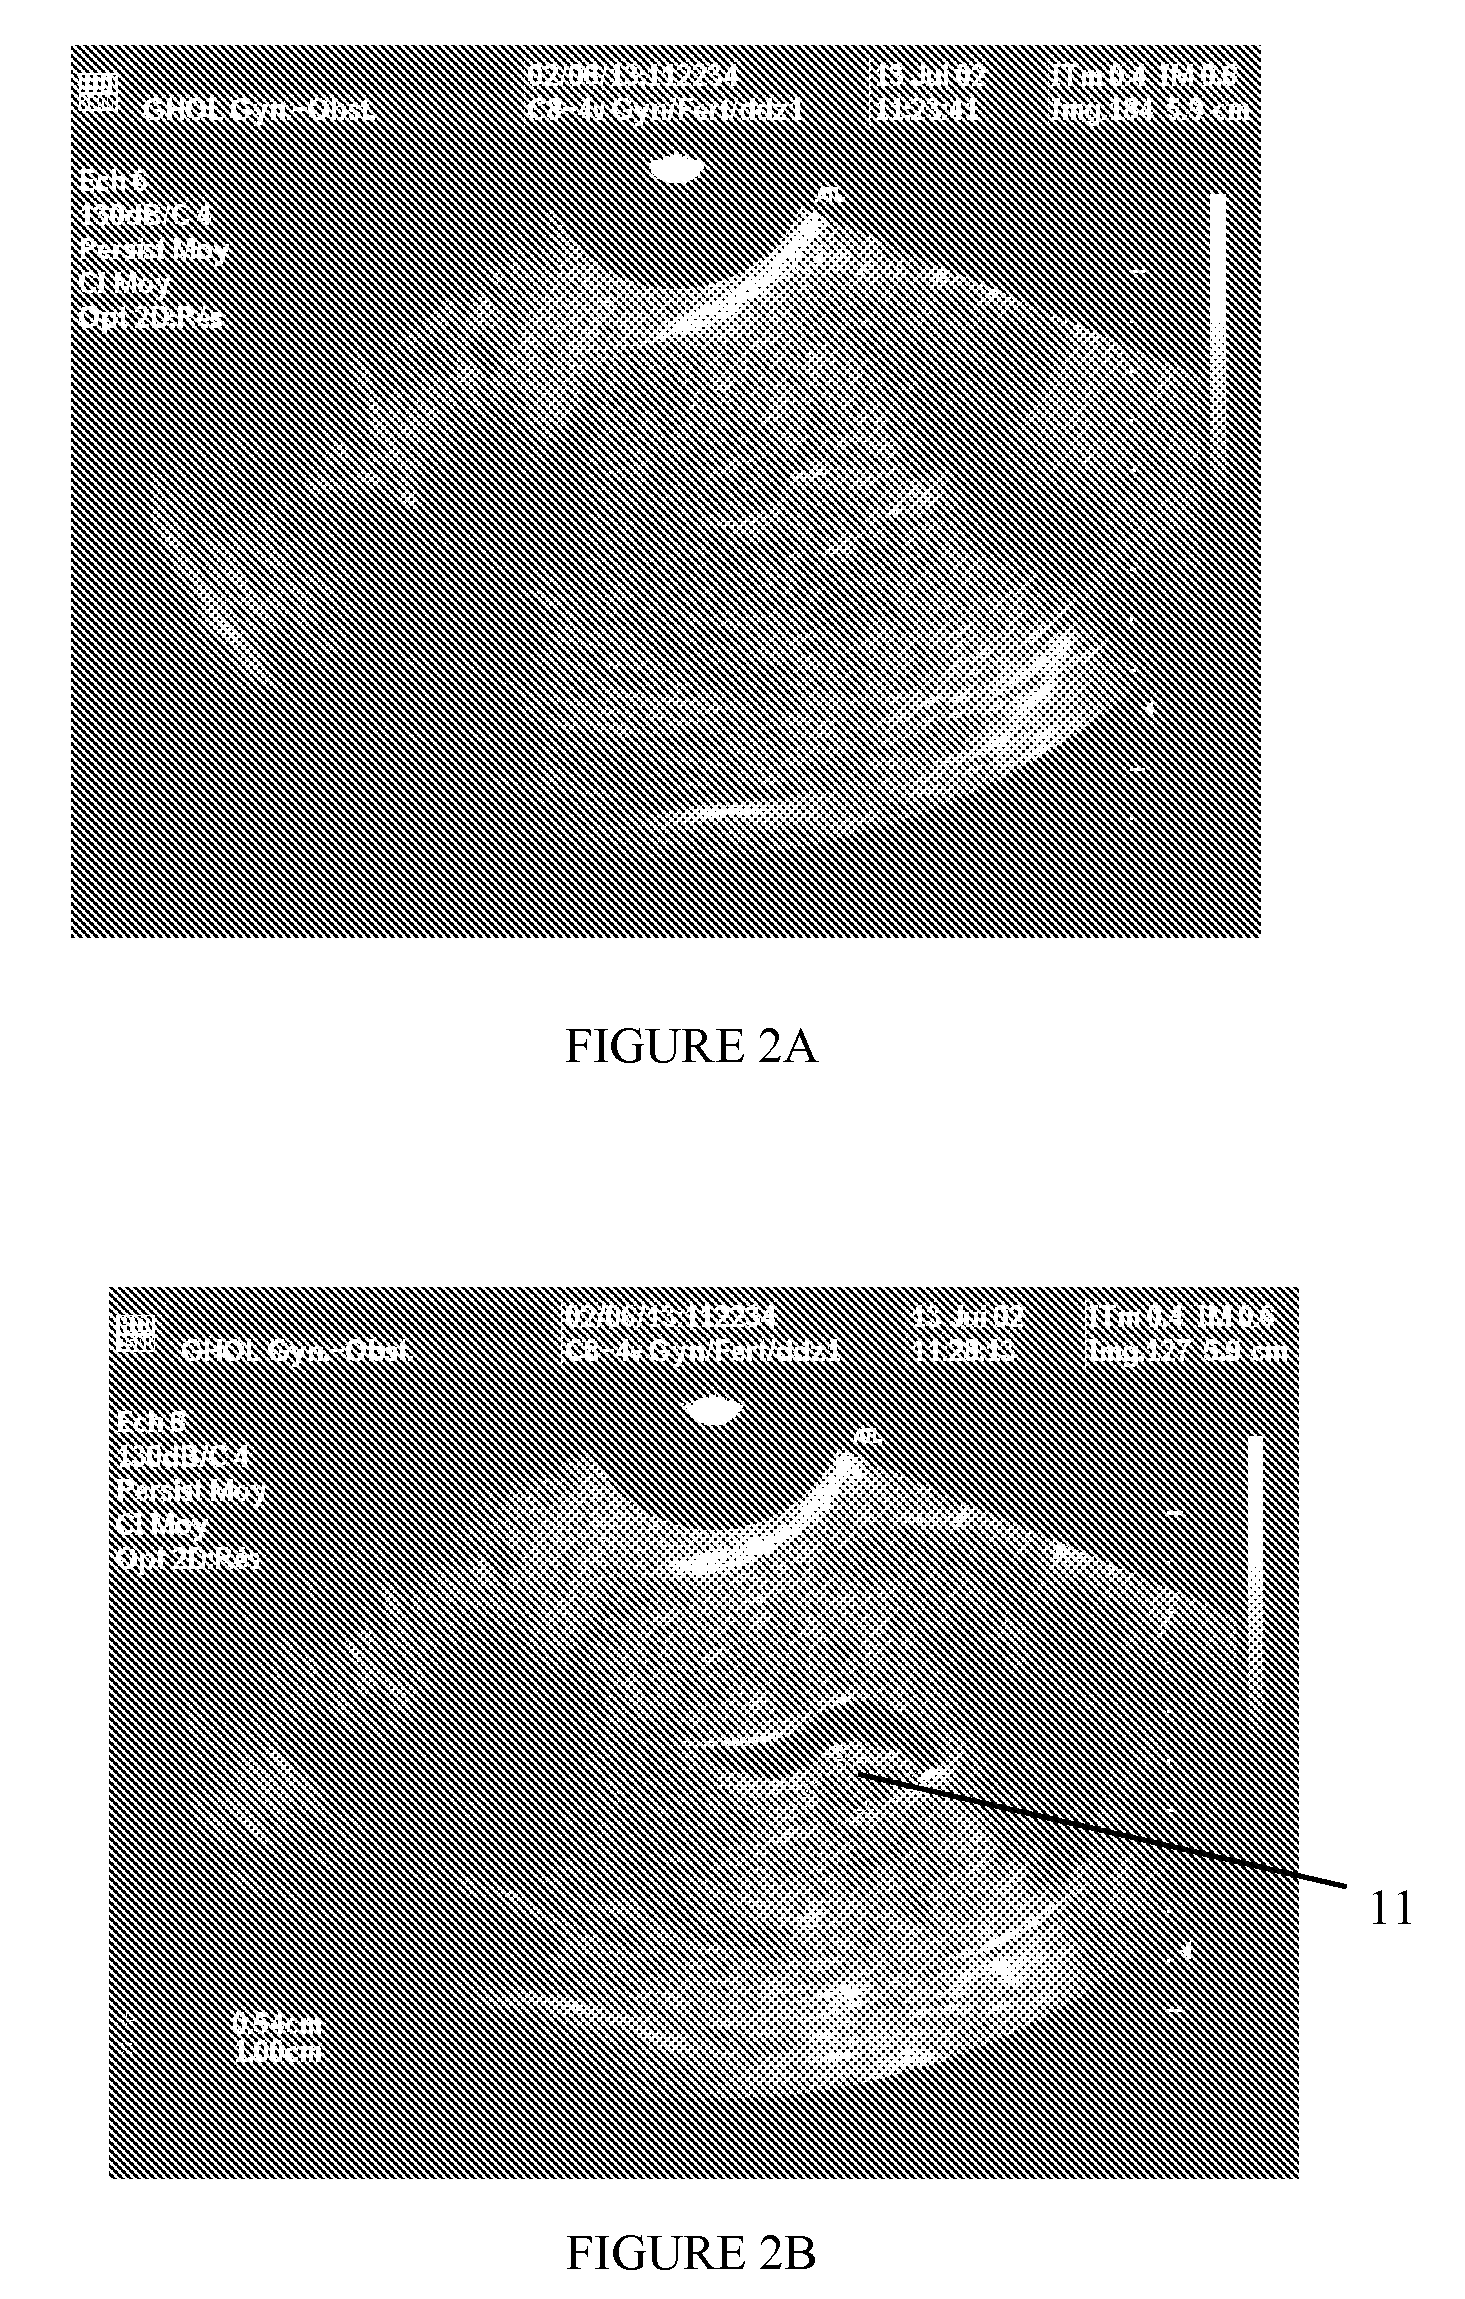 Medium for contrast enhancement or convenience for ultrasonic, endoscopic, and other medical examinations